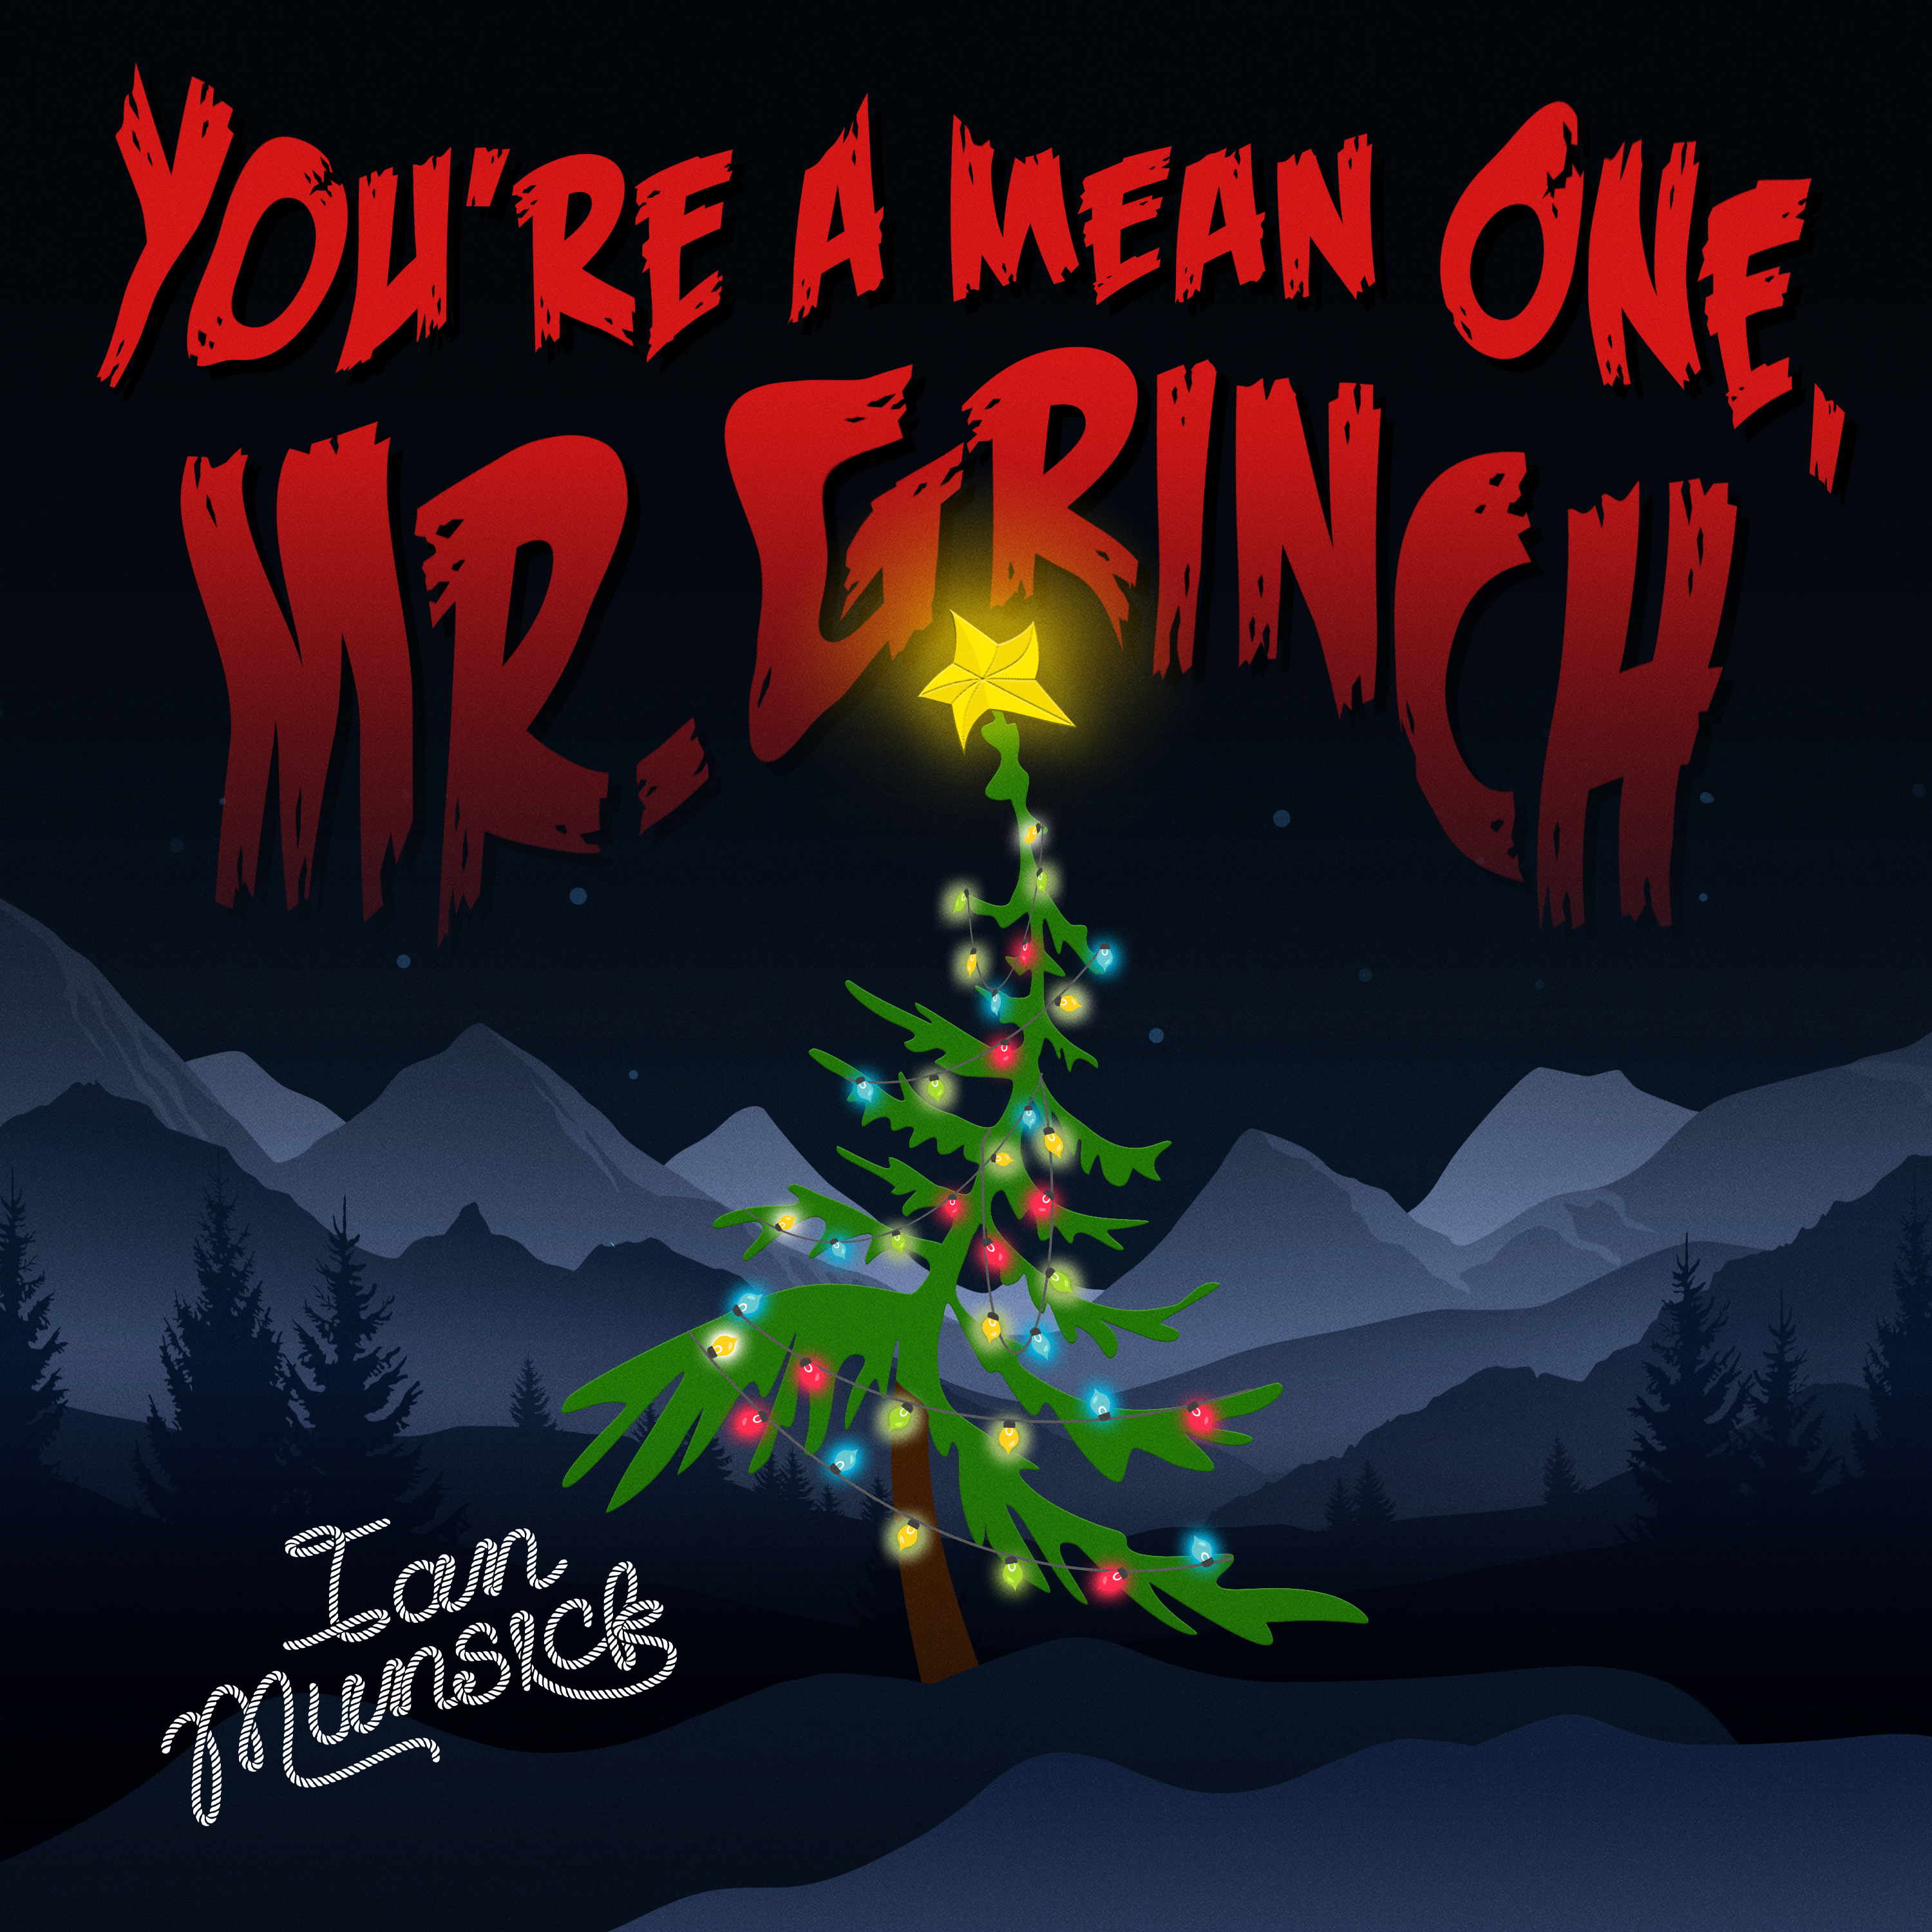 THE GRINCH GOES WEST IN IAN MUNSICK'S "YOU'RE A MEAN ONE, MR. GRINCH"